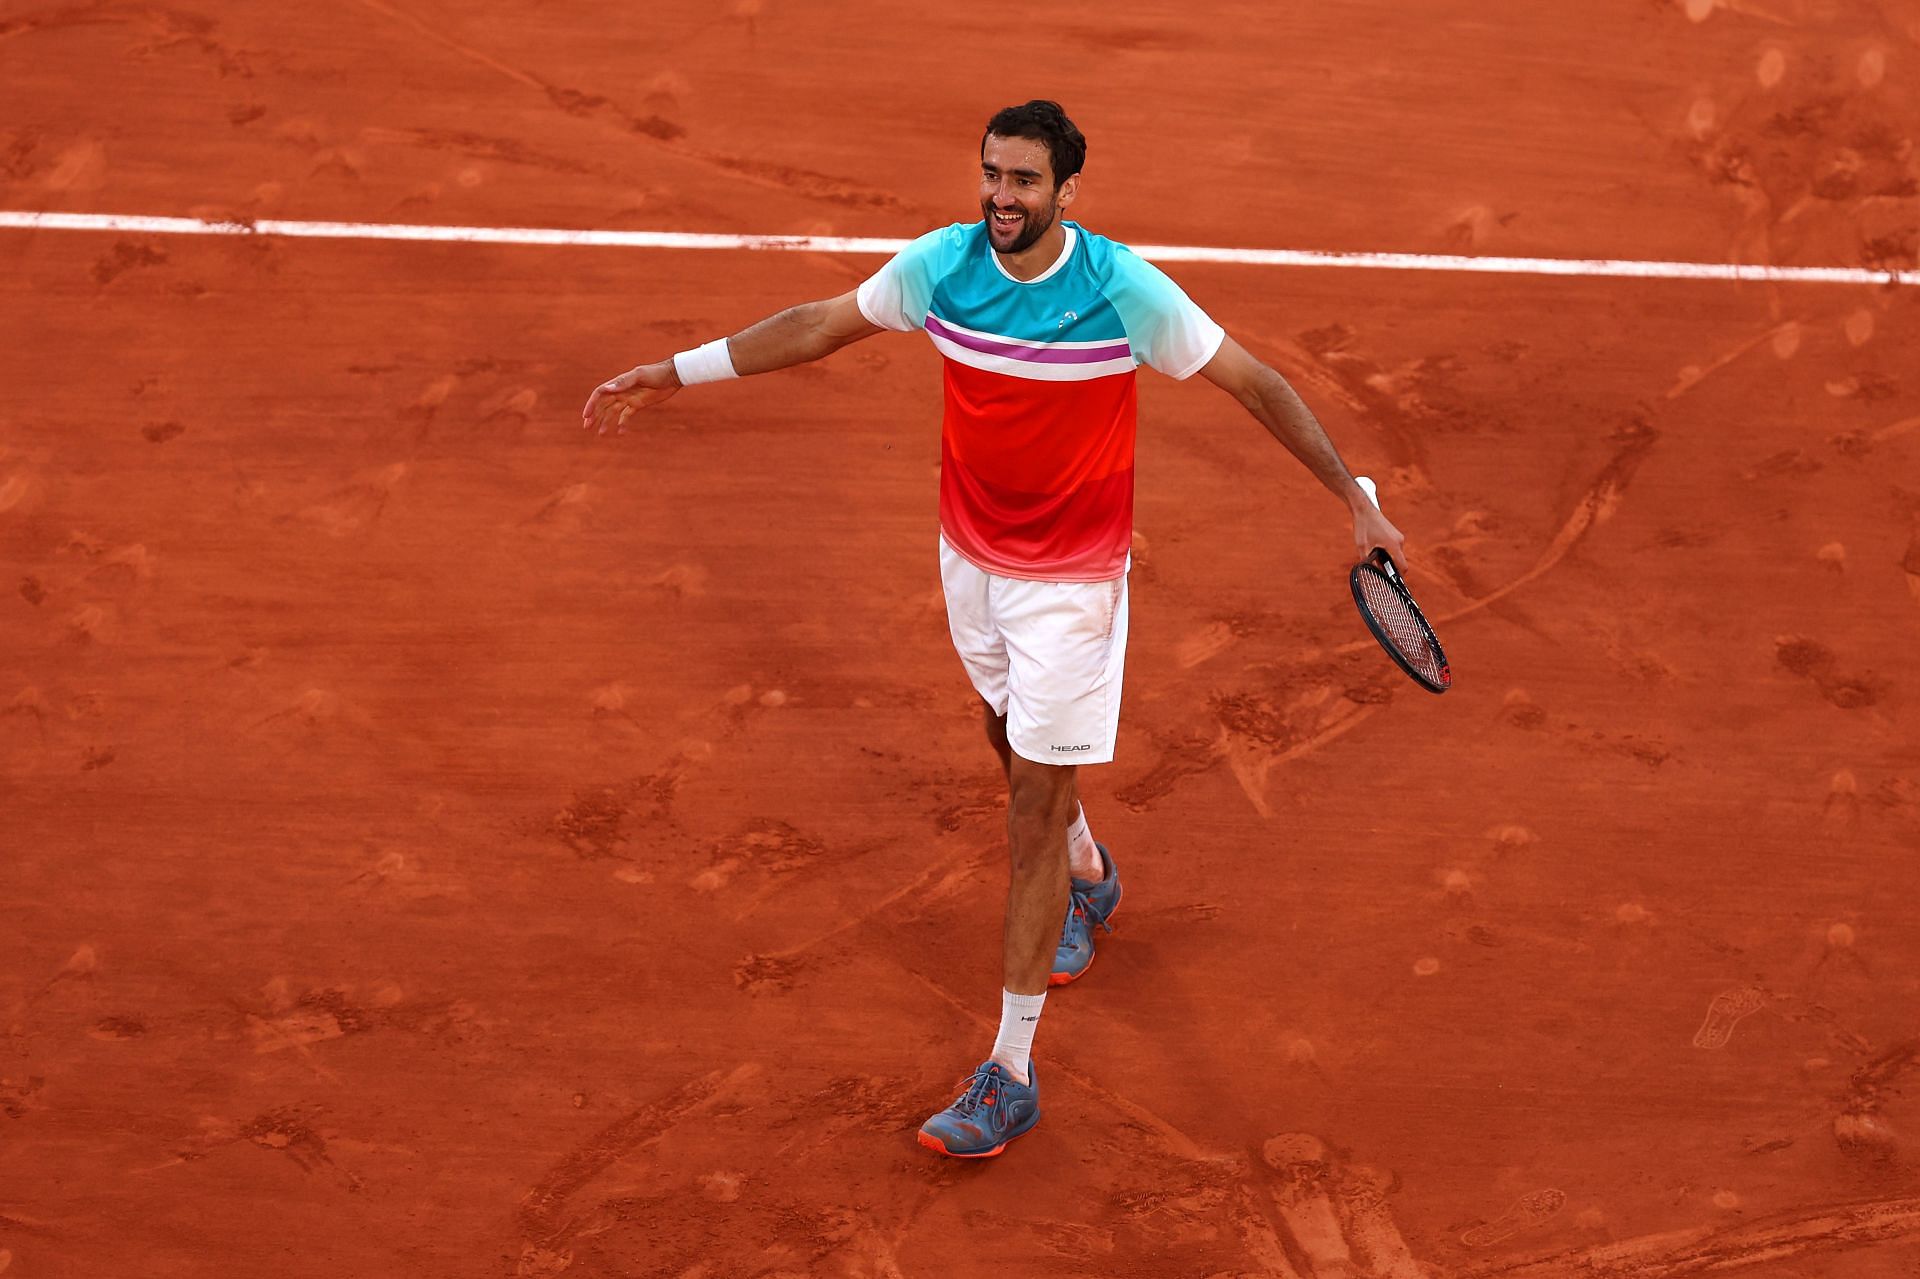 Marin Cilic has reached the semifinals or above in all four Grand Slams